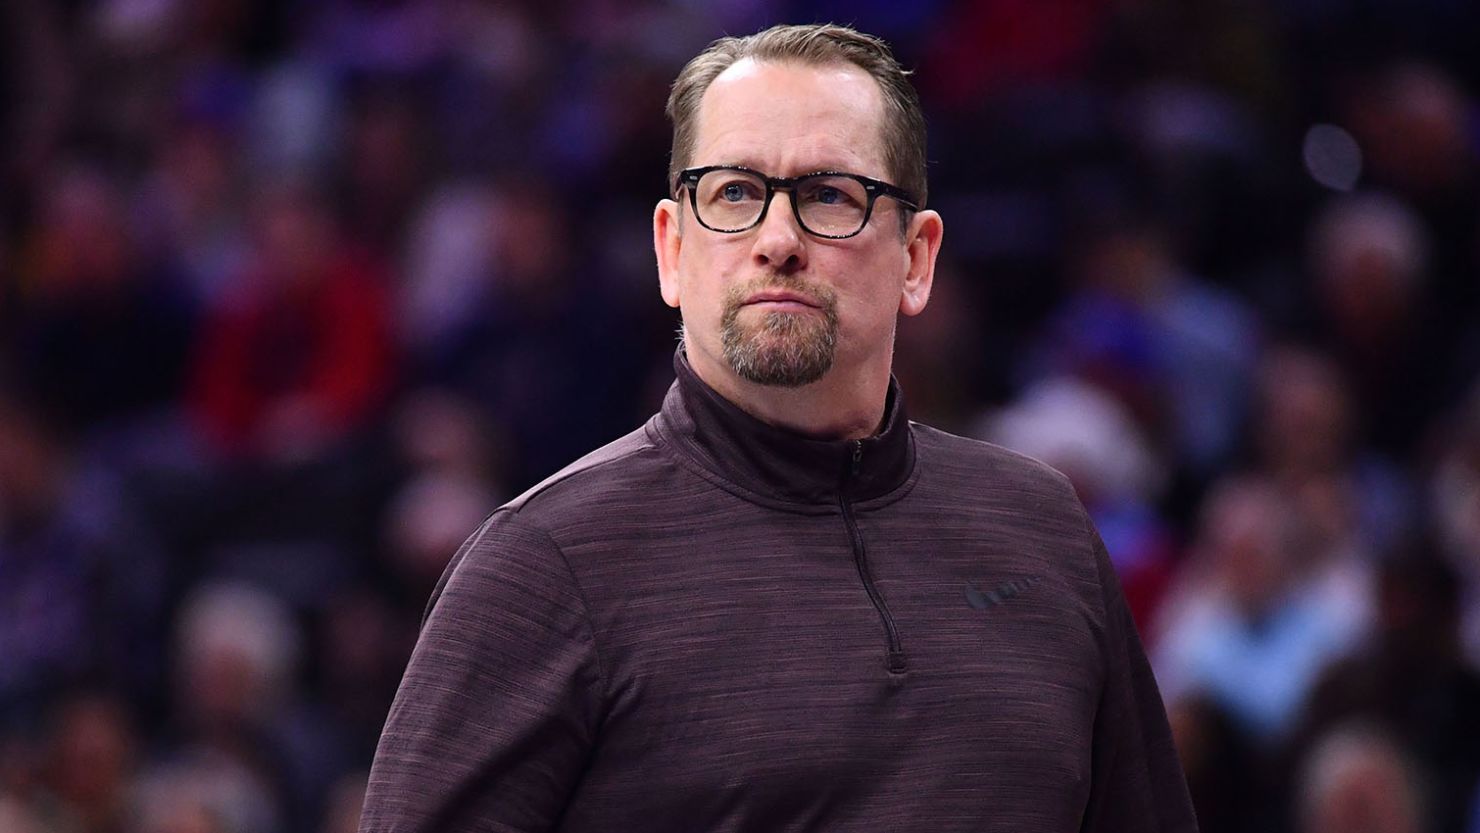 Nick Nurse has been appointed the new head coach of the Philadelphia 76ers, per league source.